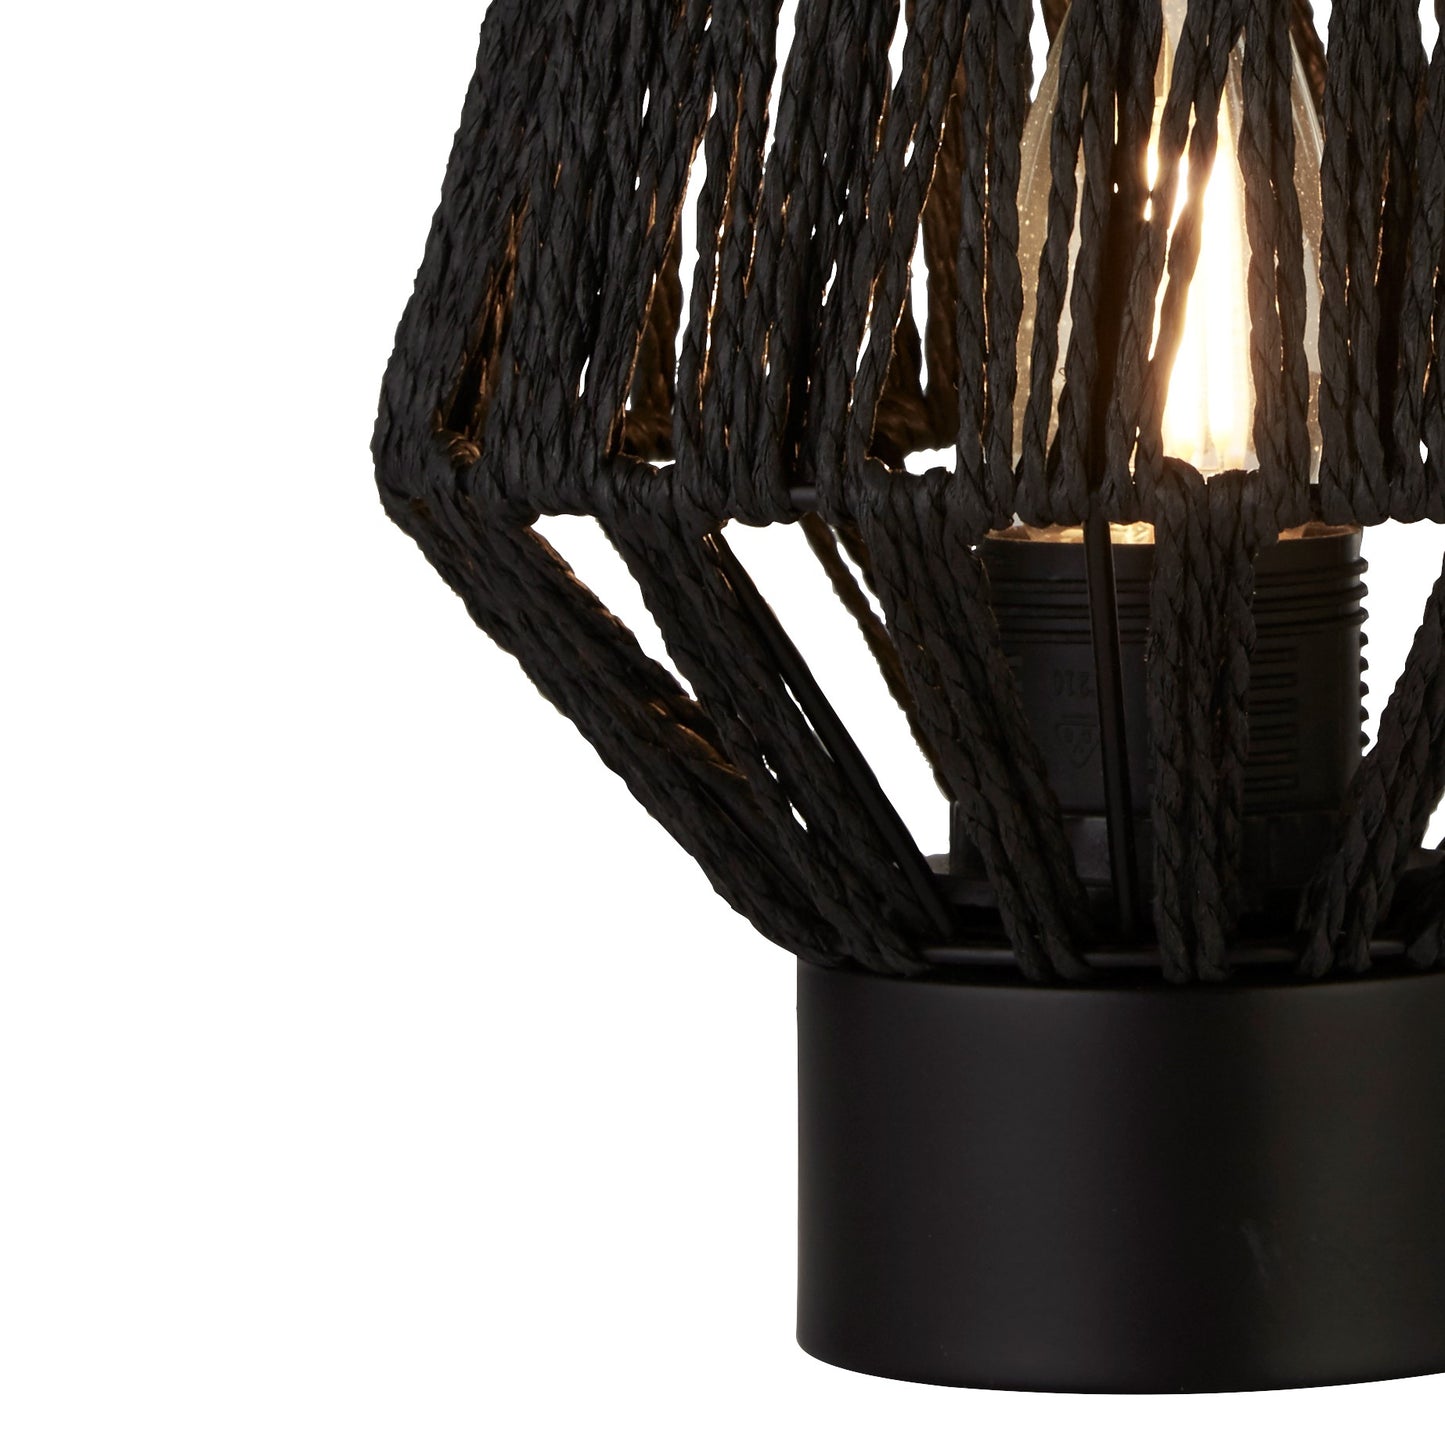 Our Woven table lamp is a beautifully geometric woven lamp and will be sure to add a natural and scandic vibe to any room within your home. Complimented with a black base this lamp will certainly enhance any modern décor.  